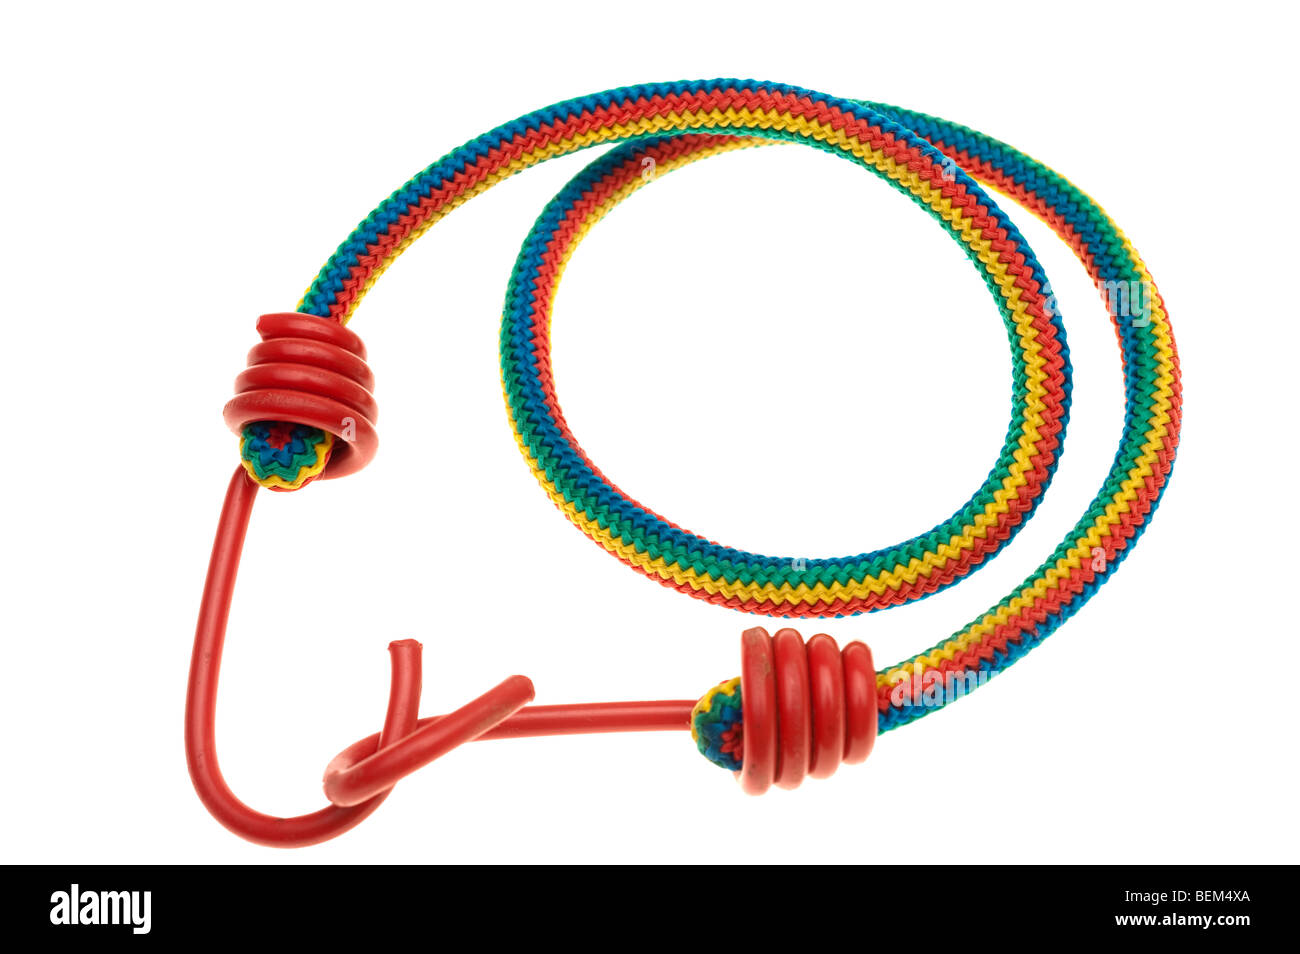 multj coloured plastic coated coiled elastic bungee cord Stock Photo - Alamy